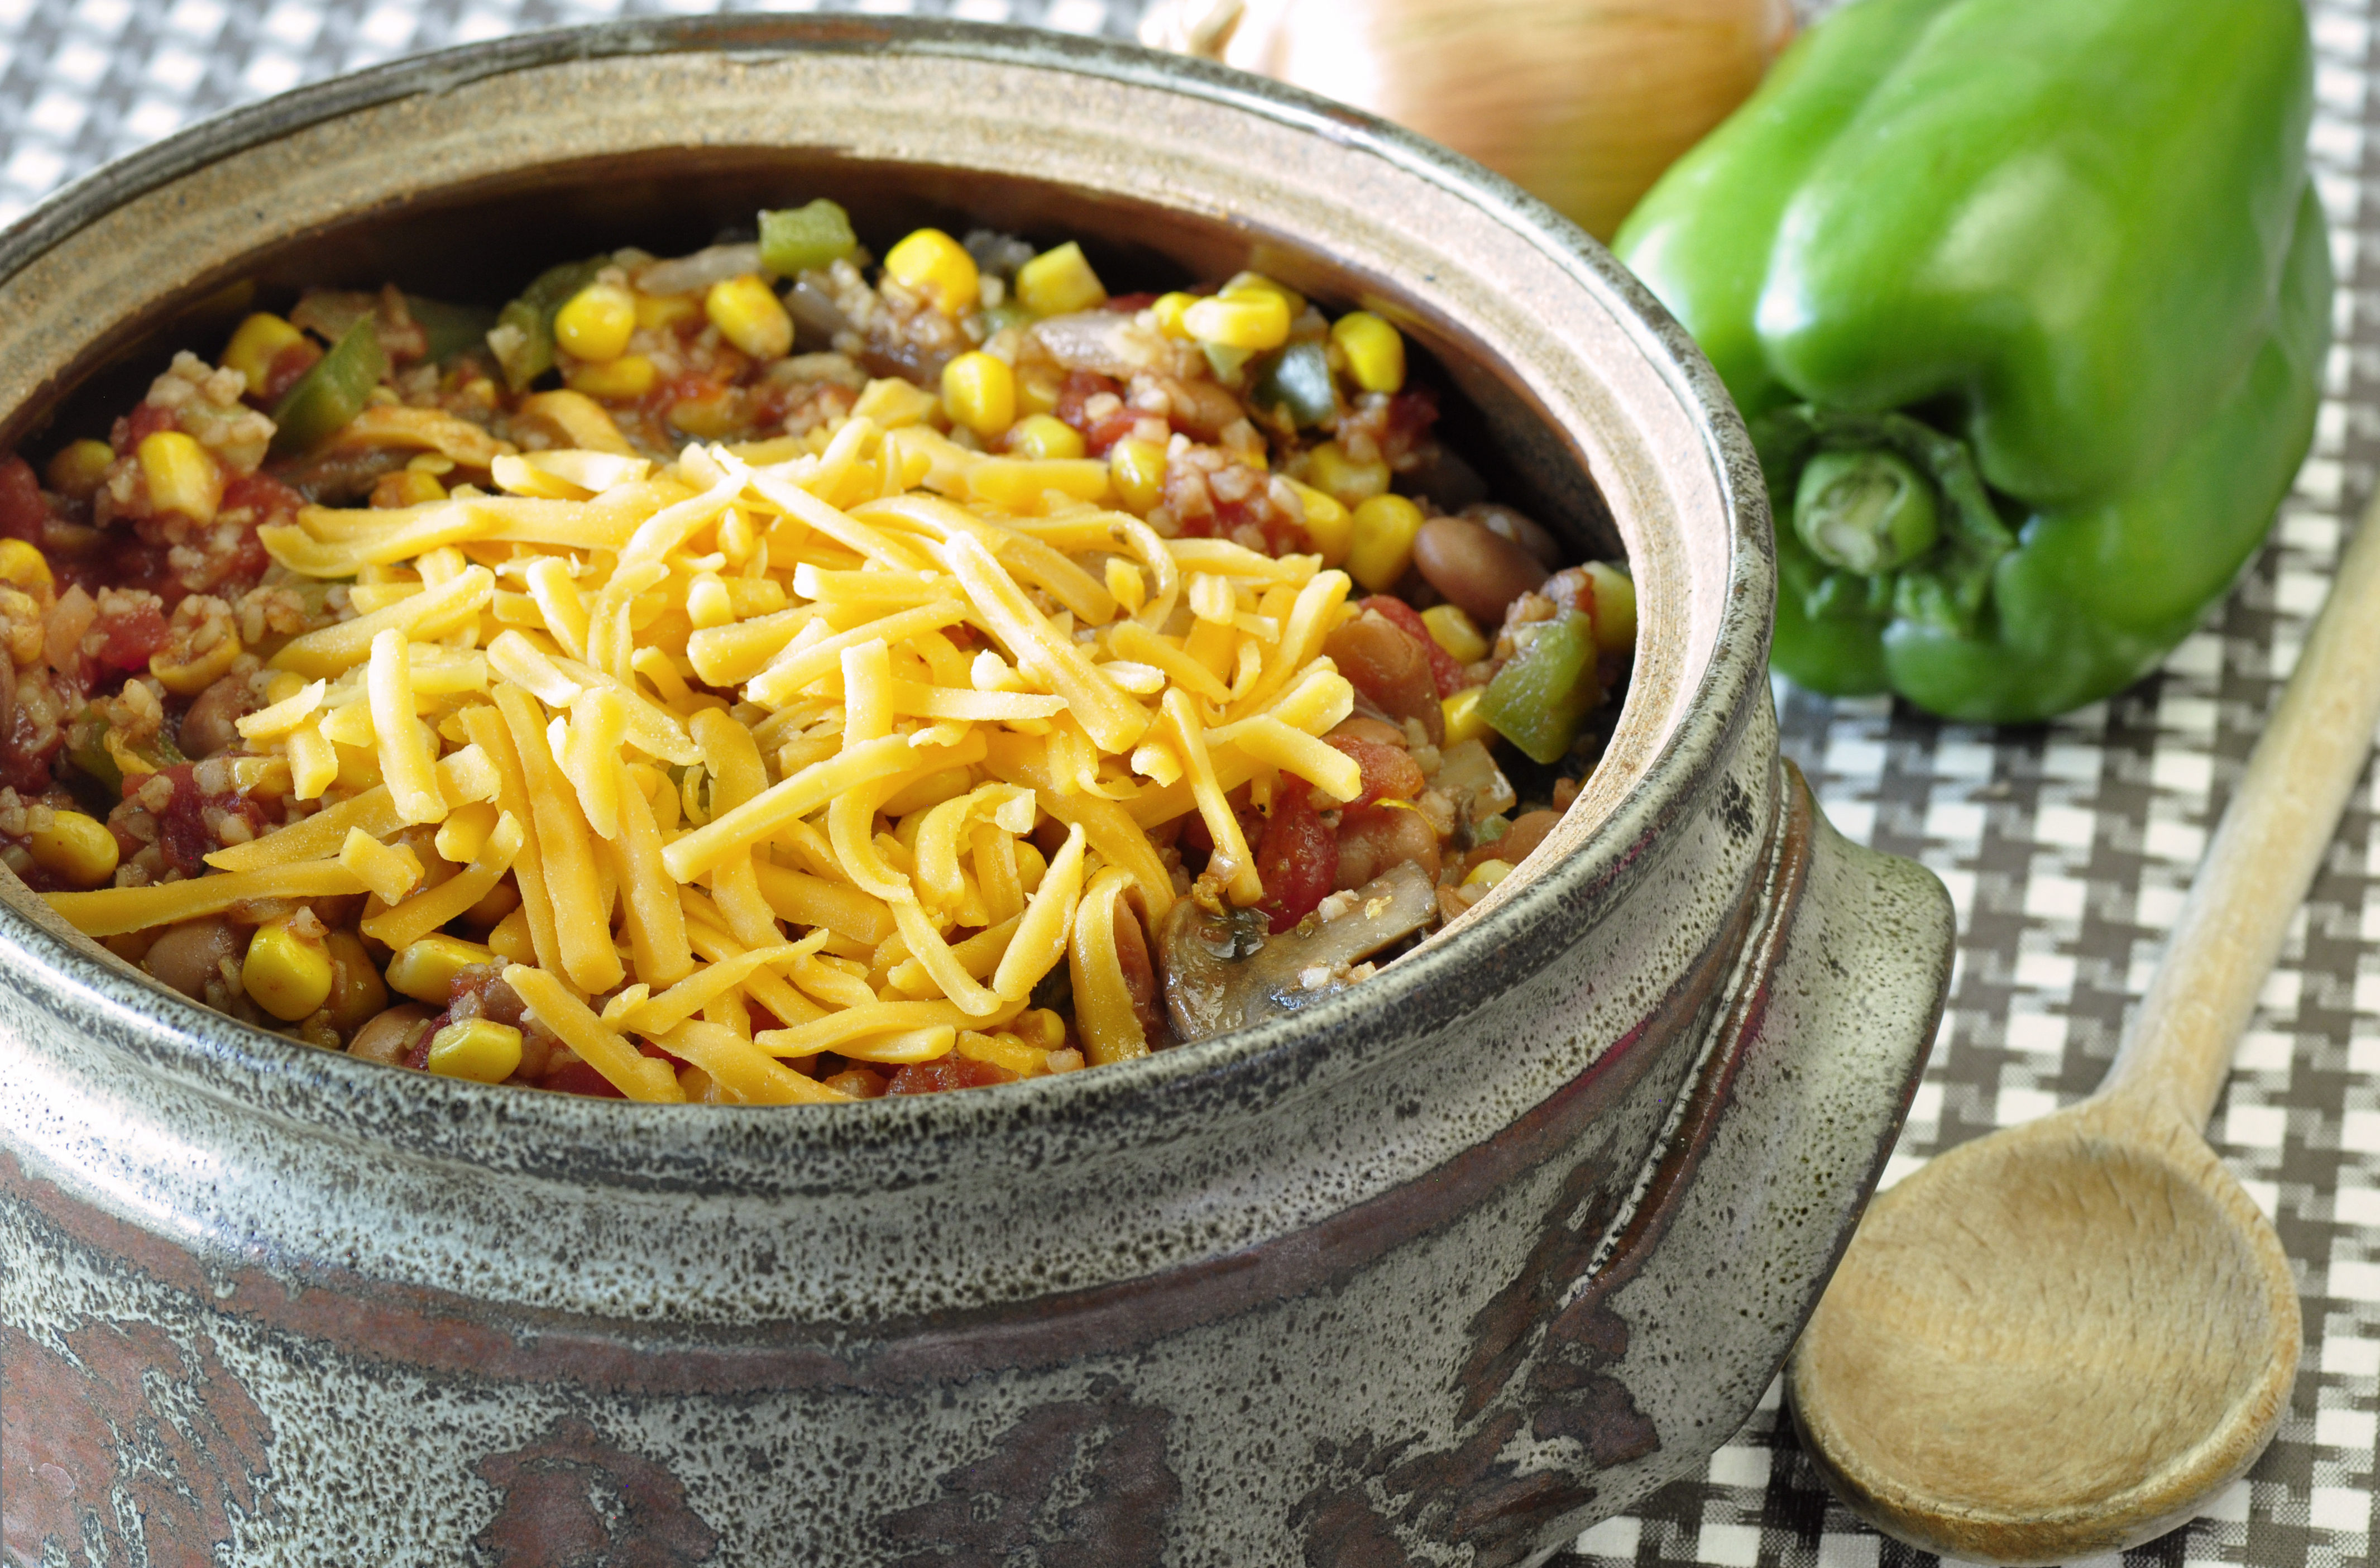 Vegetarian Chili Recipe served on table